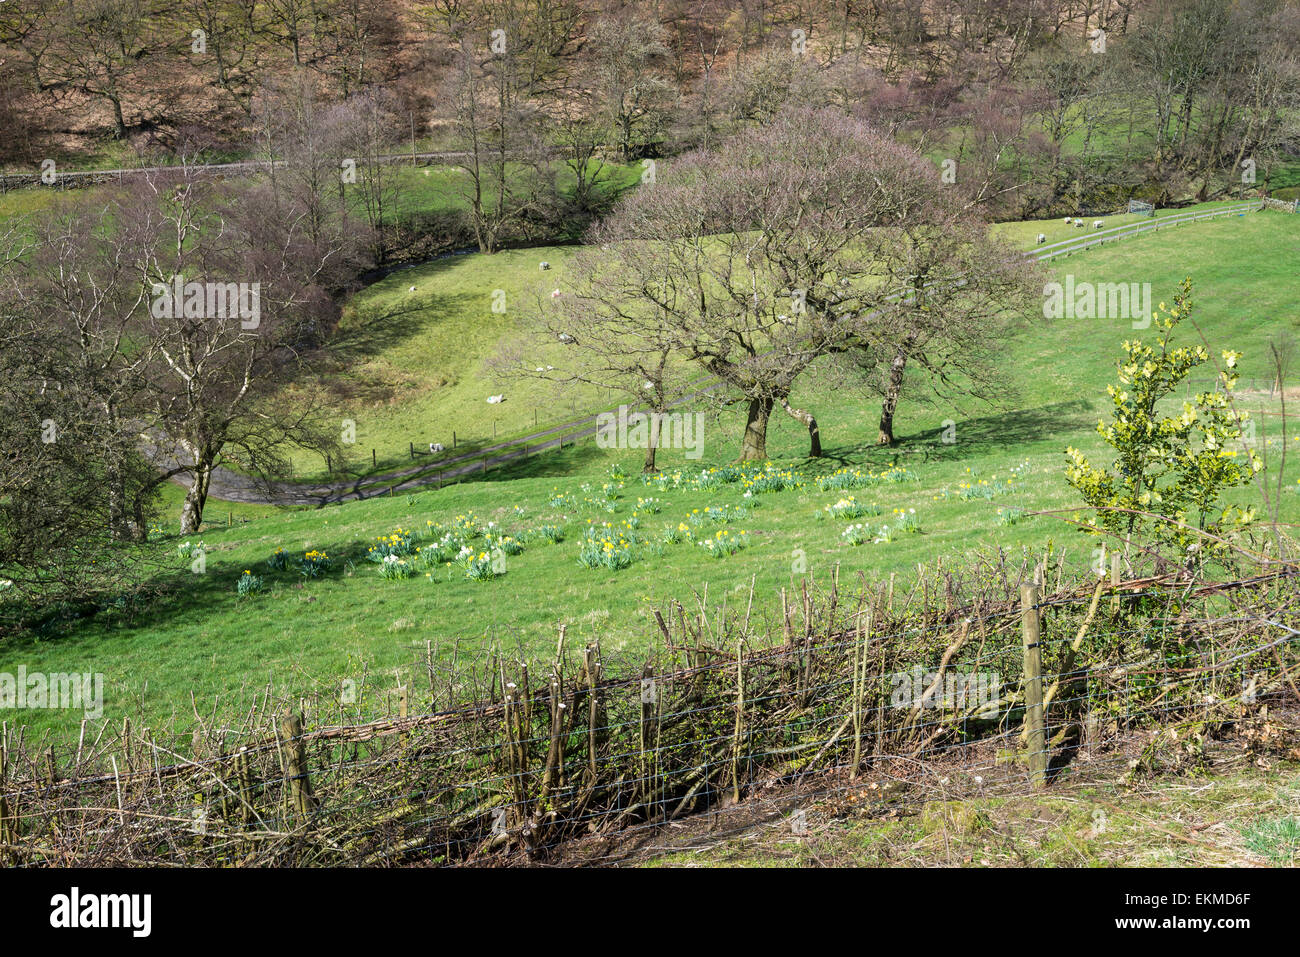 Rural scene near the village of Hayfield in the Peak District, Derbyshire. Daffodils flowering in the spring sunshine. Stock Photo